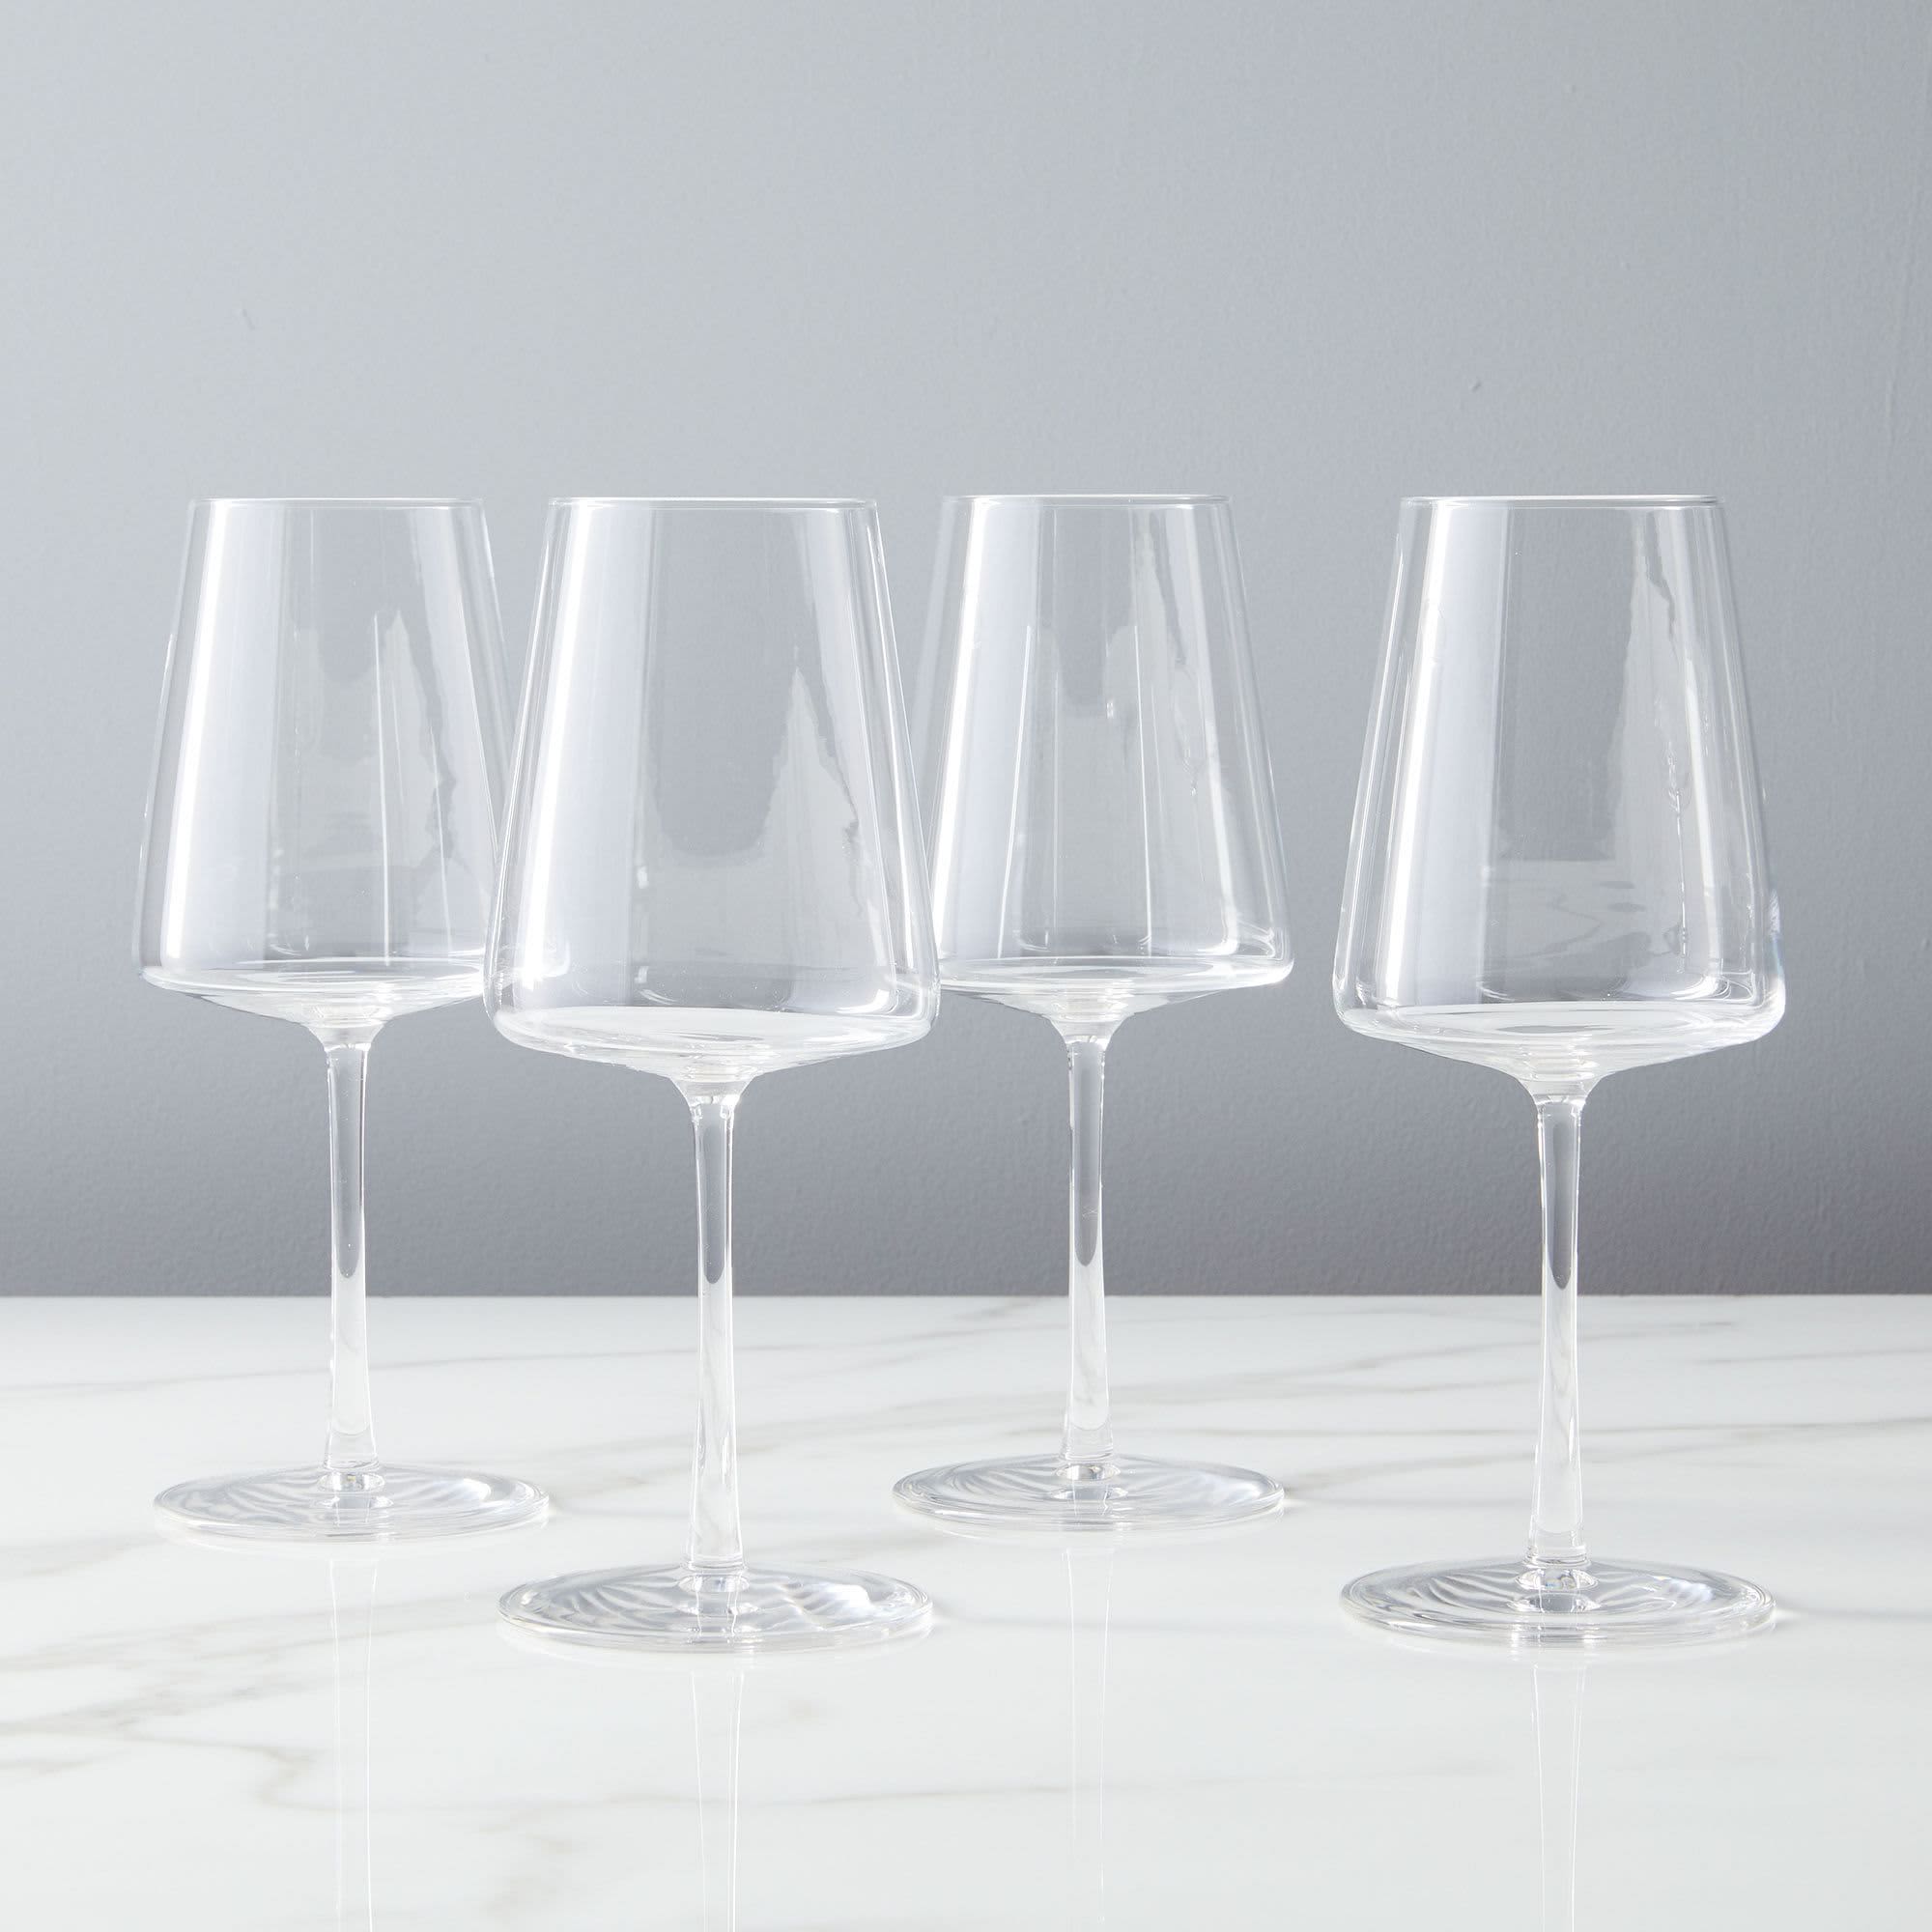 The 10 Best Budget-Friendly Wine Glasses Under $10